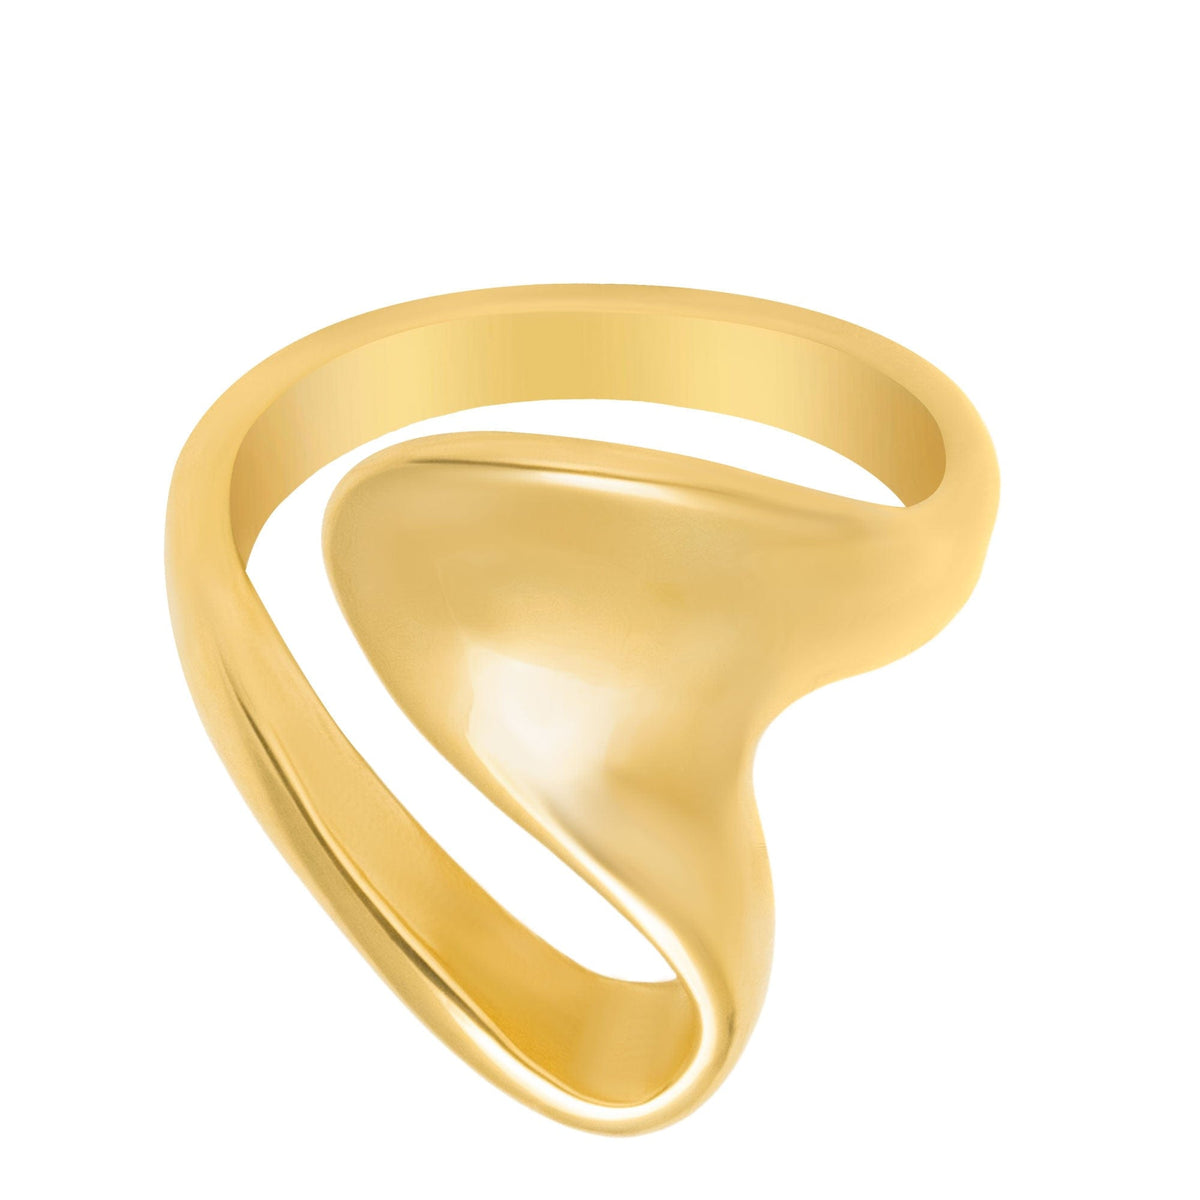 BohoMoon Stainless Steel Curious Ring Gold / US 5 / UK J / EUR 49 (x small)